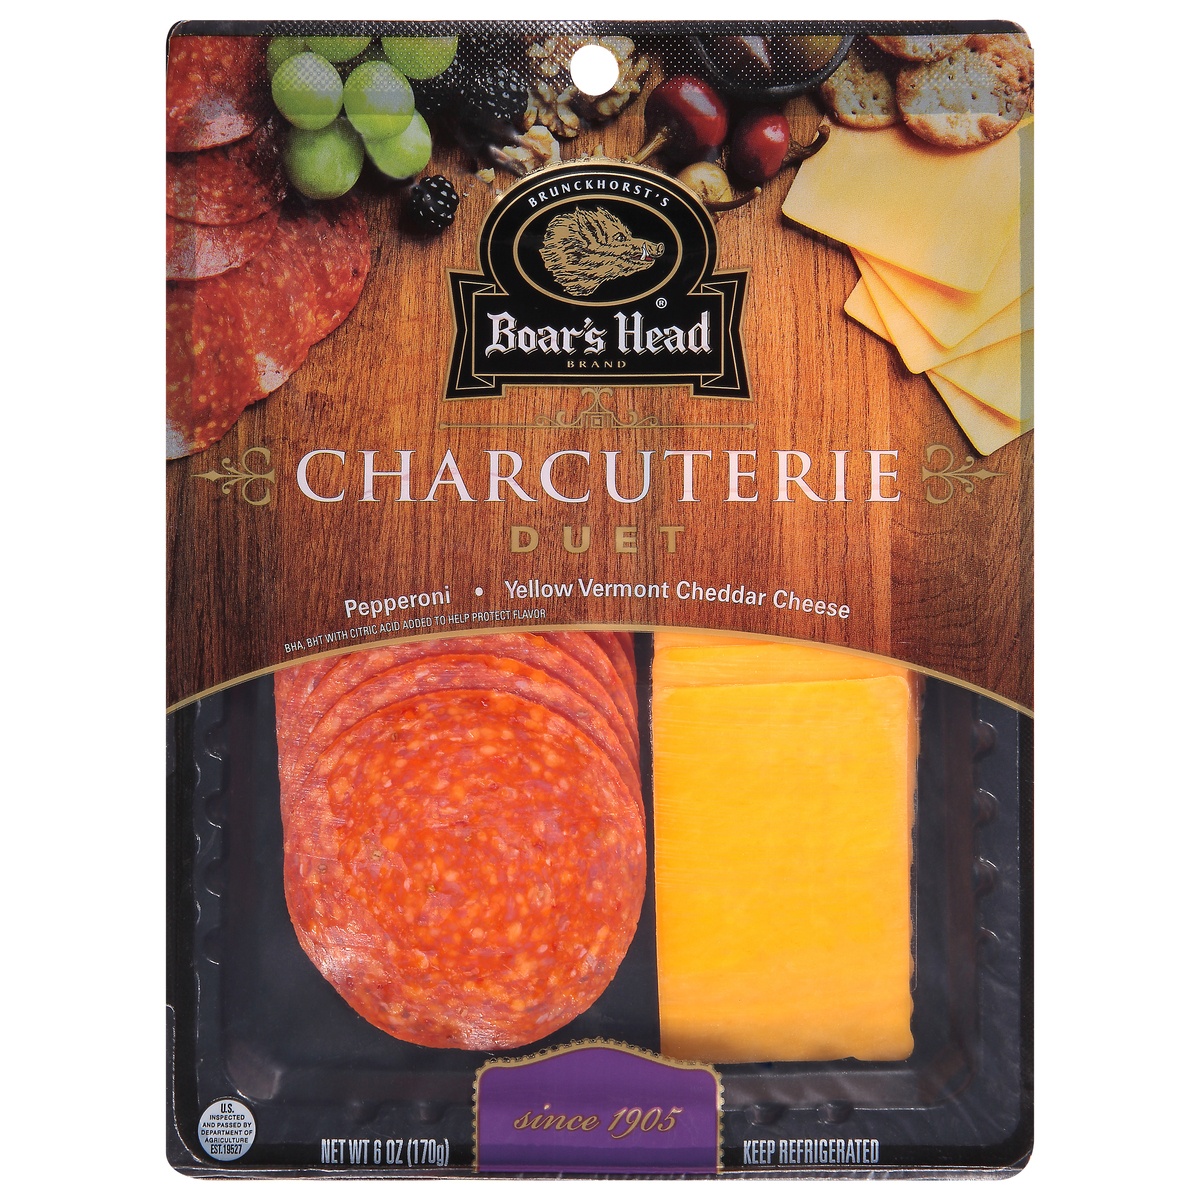 slide 1 of 11, Boar's Head Charcuterie, Duet, Pepperoni & Yellow Vermont Cheddar Cheese, 1 ct